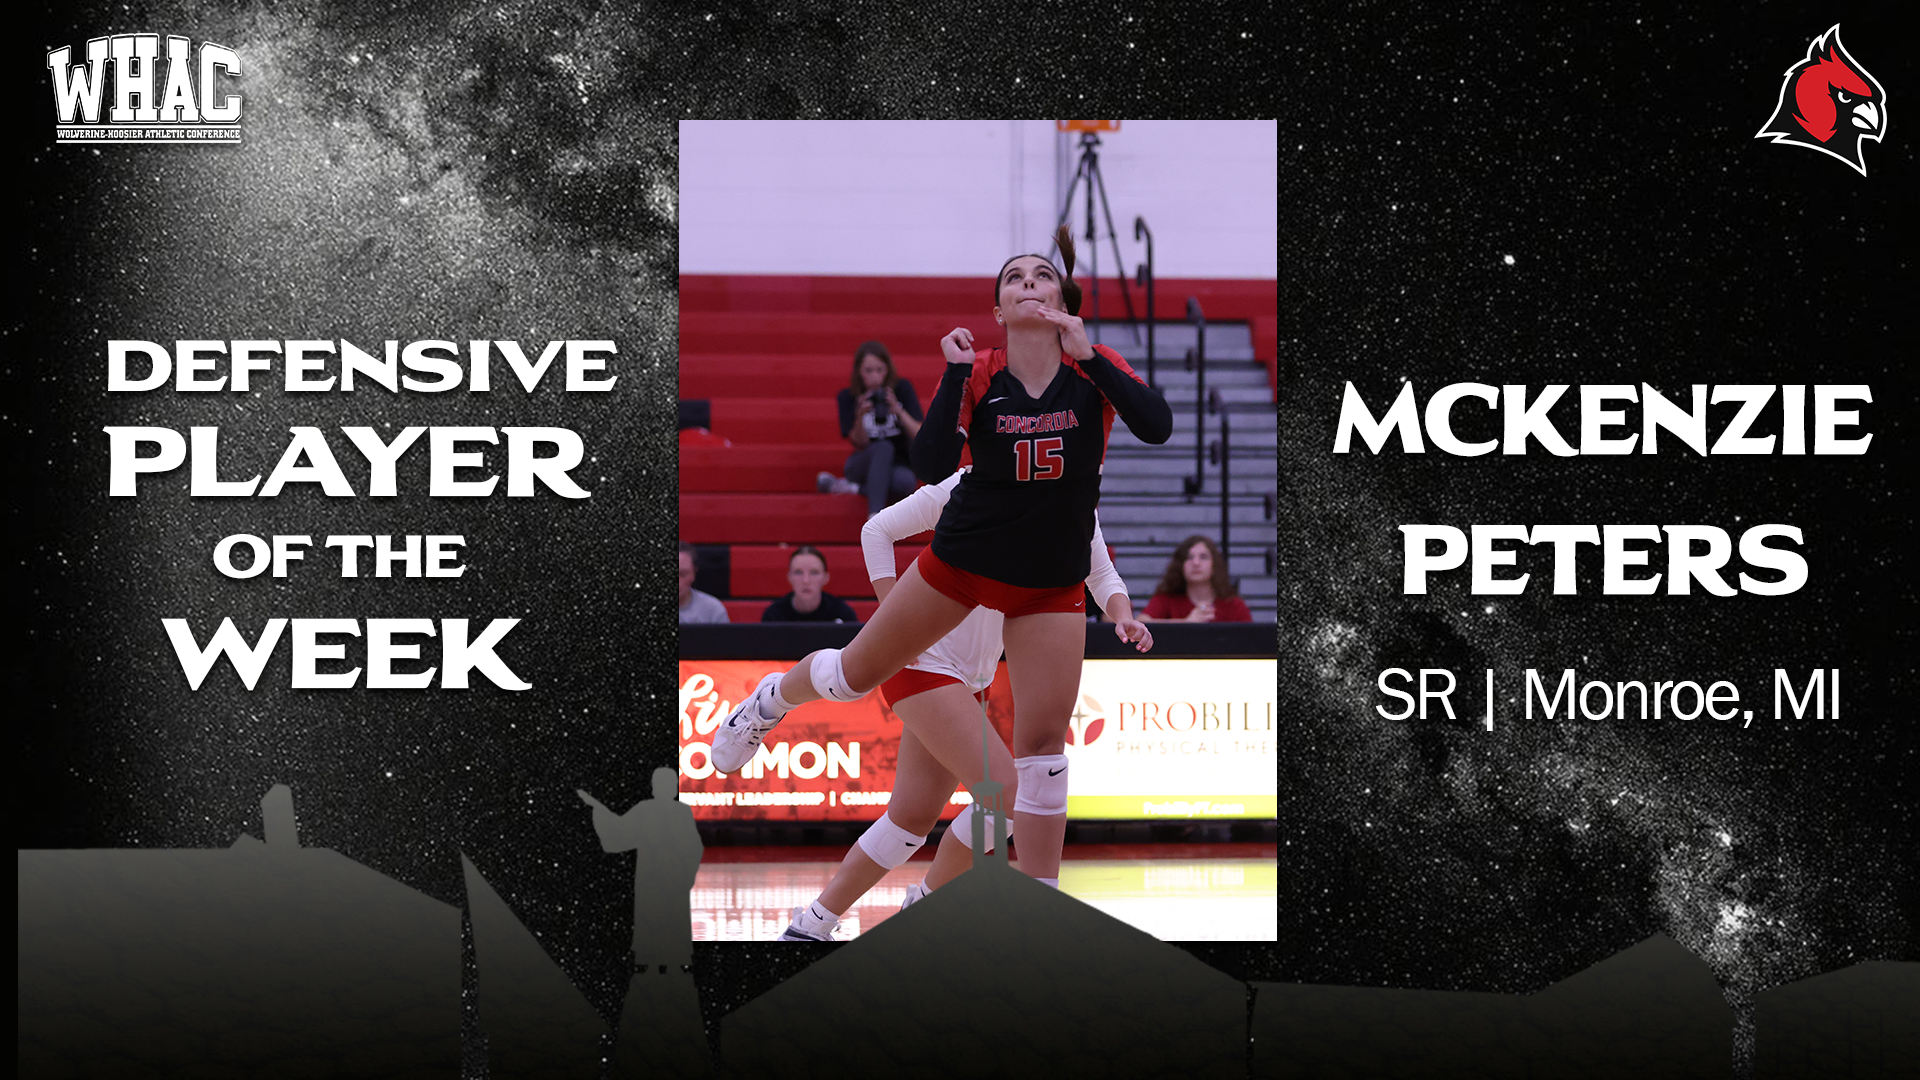 Volleyball's McKenzie Peters earns WHAC Defensive Player of the Week honors